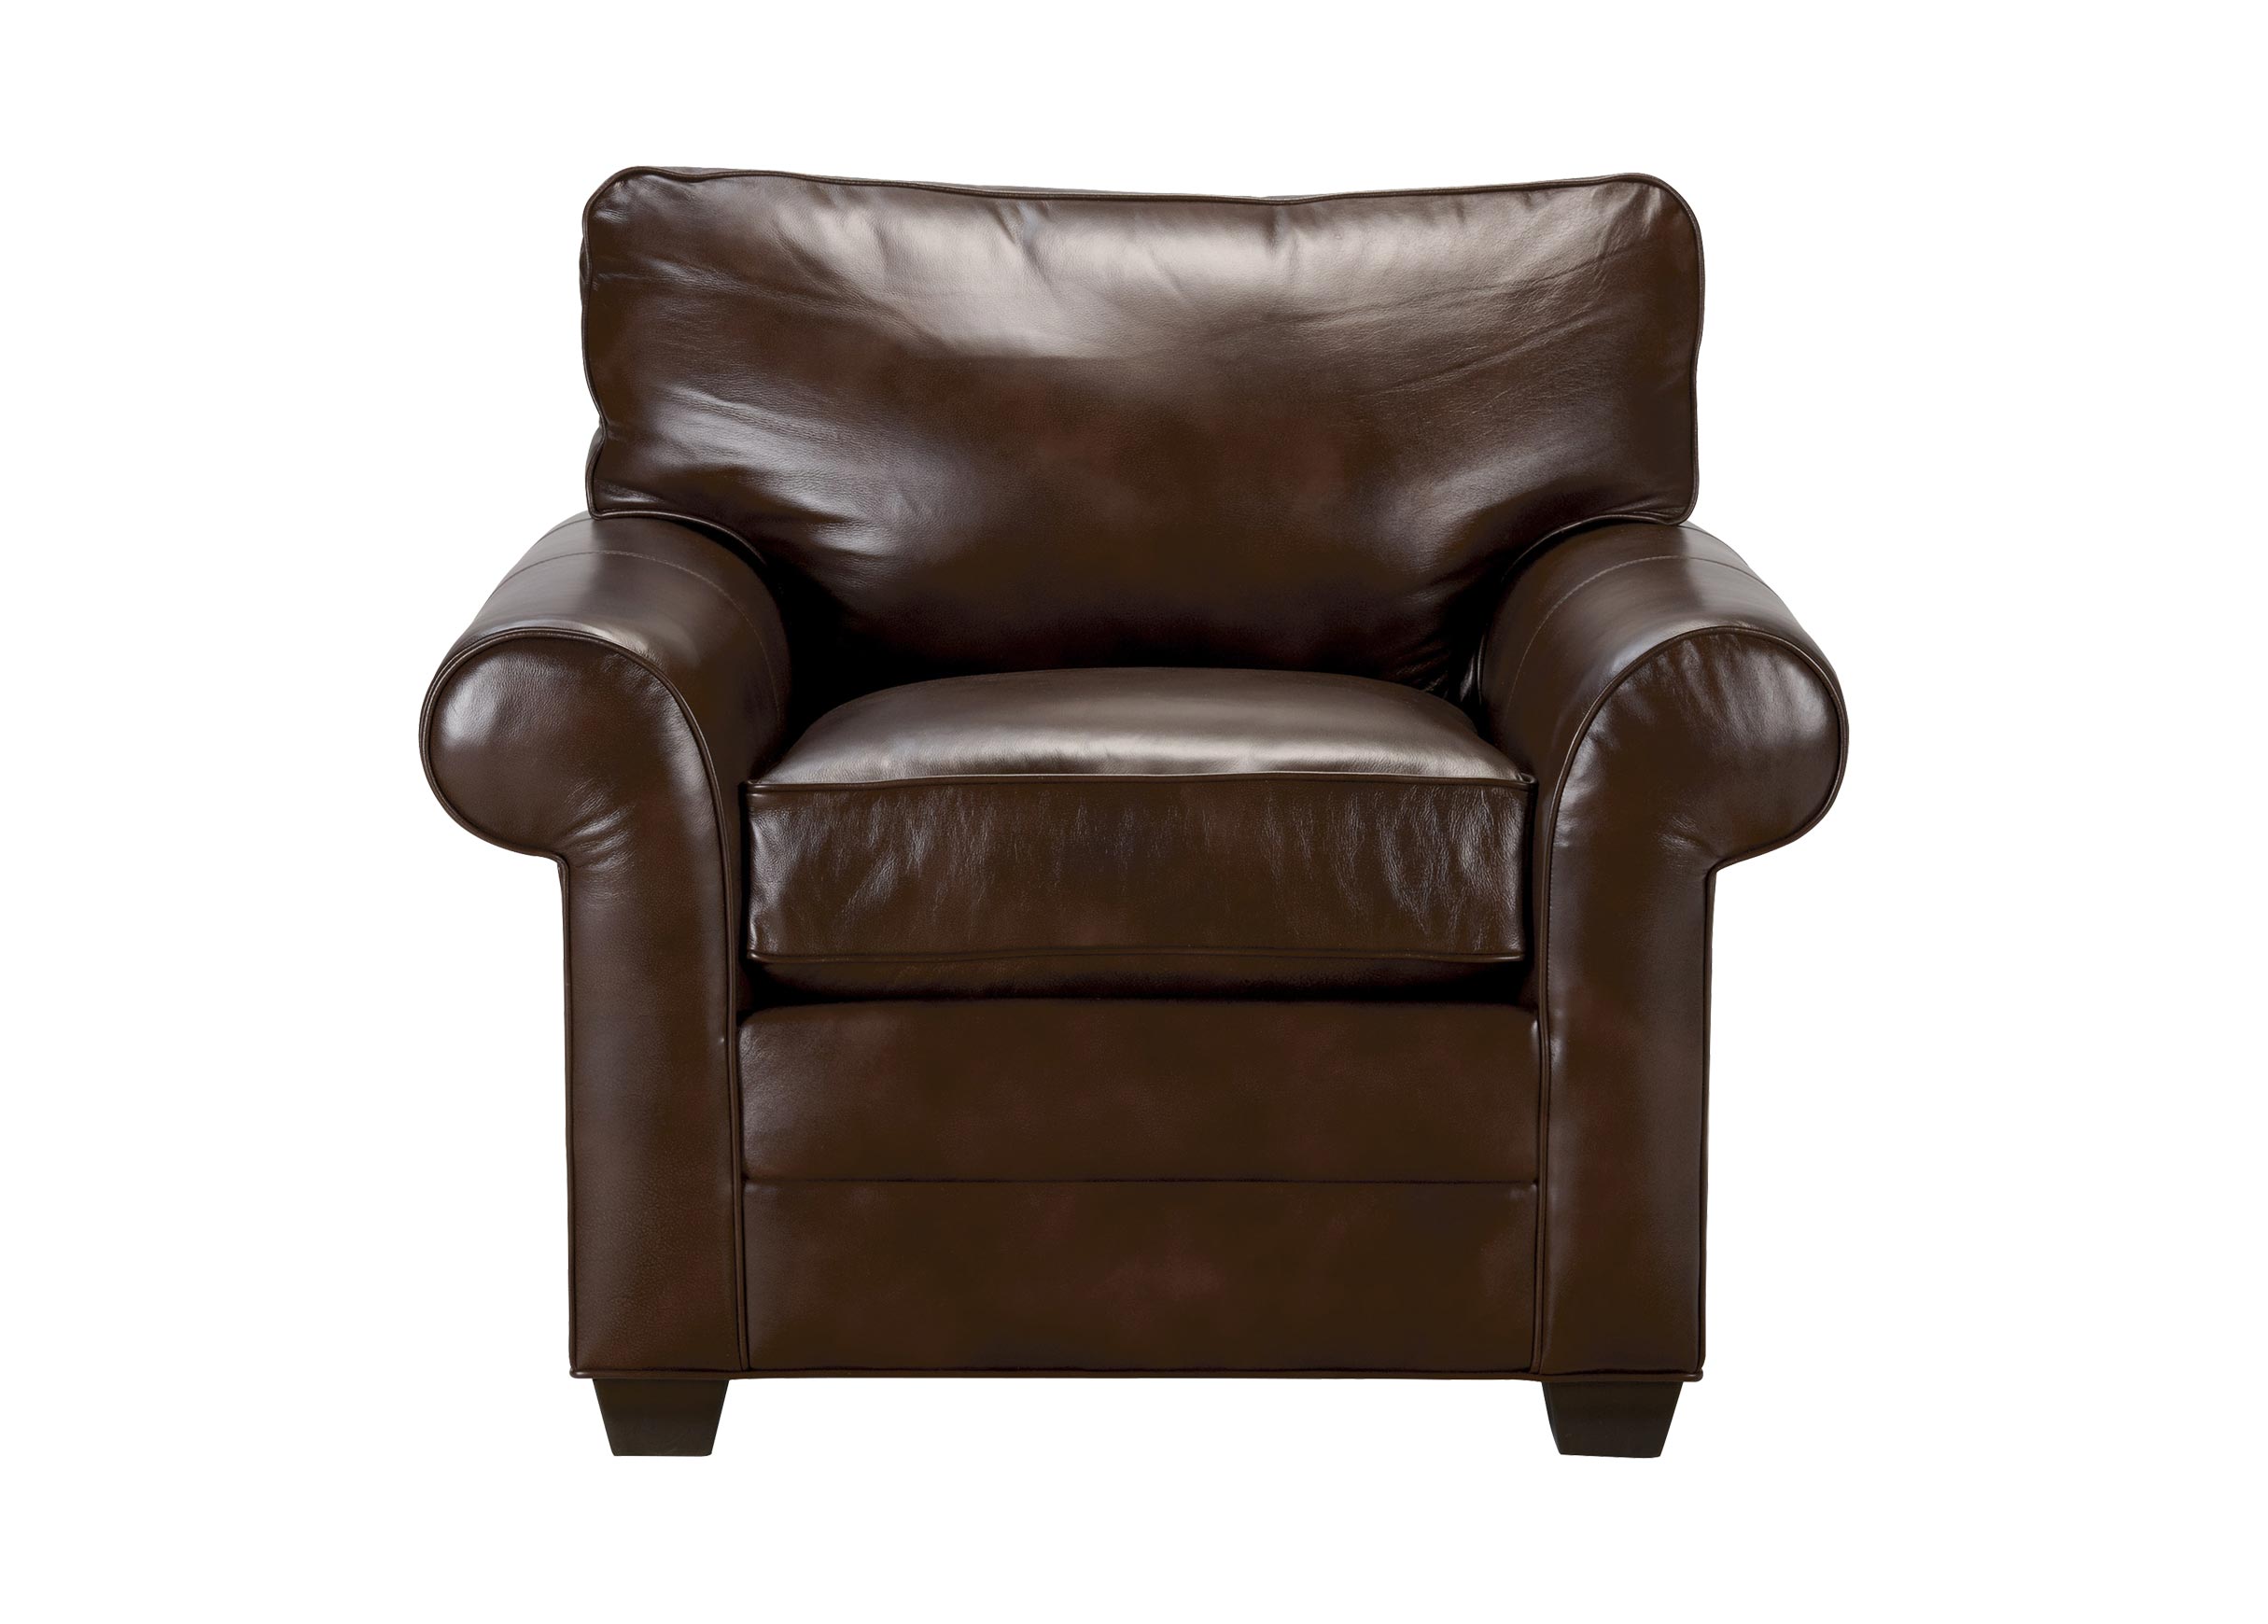 RollArm Leather Chair, Quick Ship Chairs